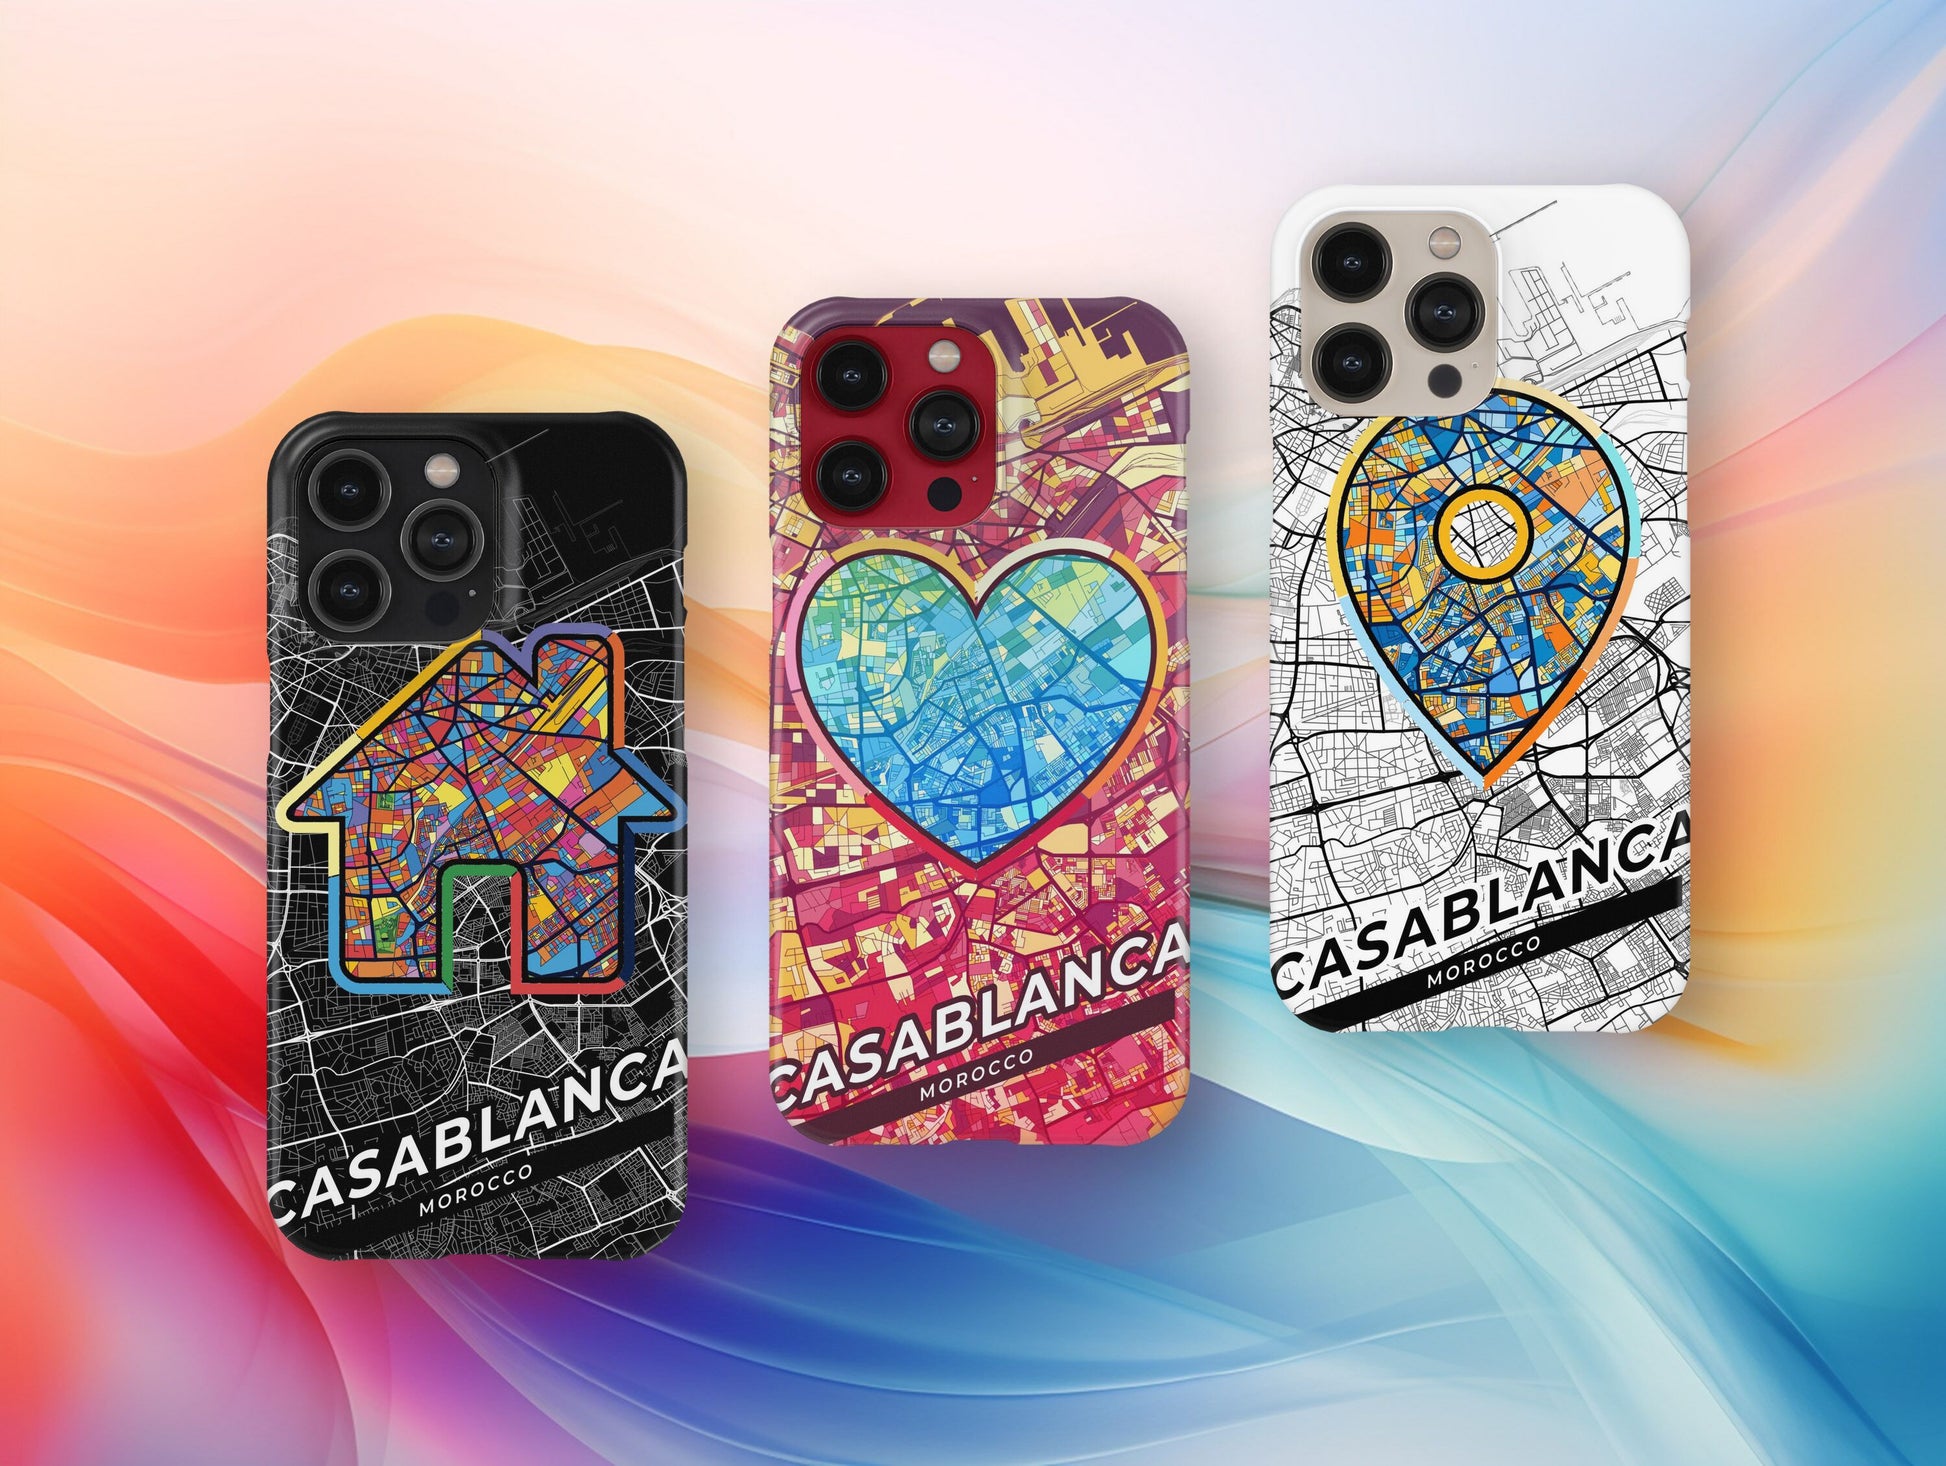 Casablanca Morocco slim phone case with colorful icon. Birthday, wedding or housewarming gift. Couple match cases.